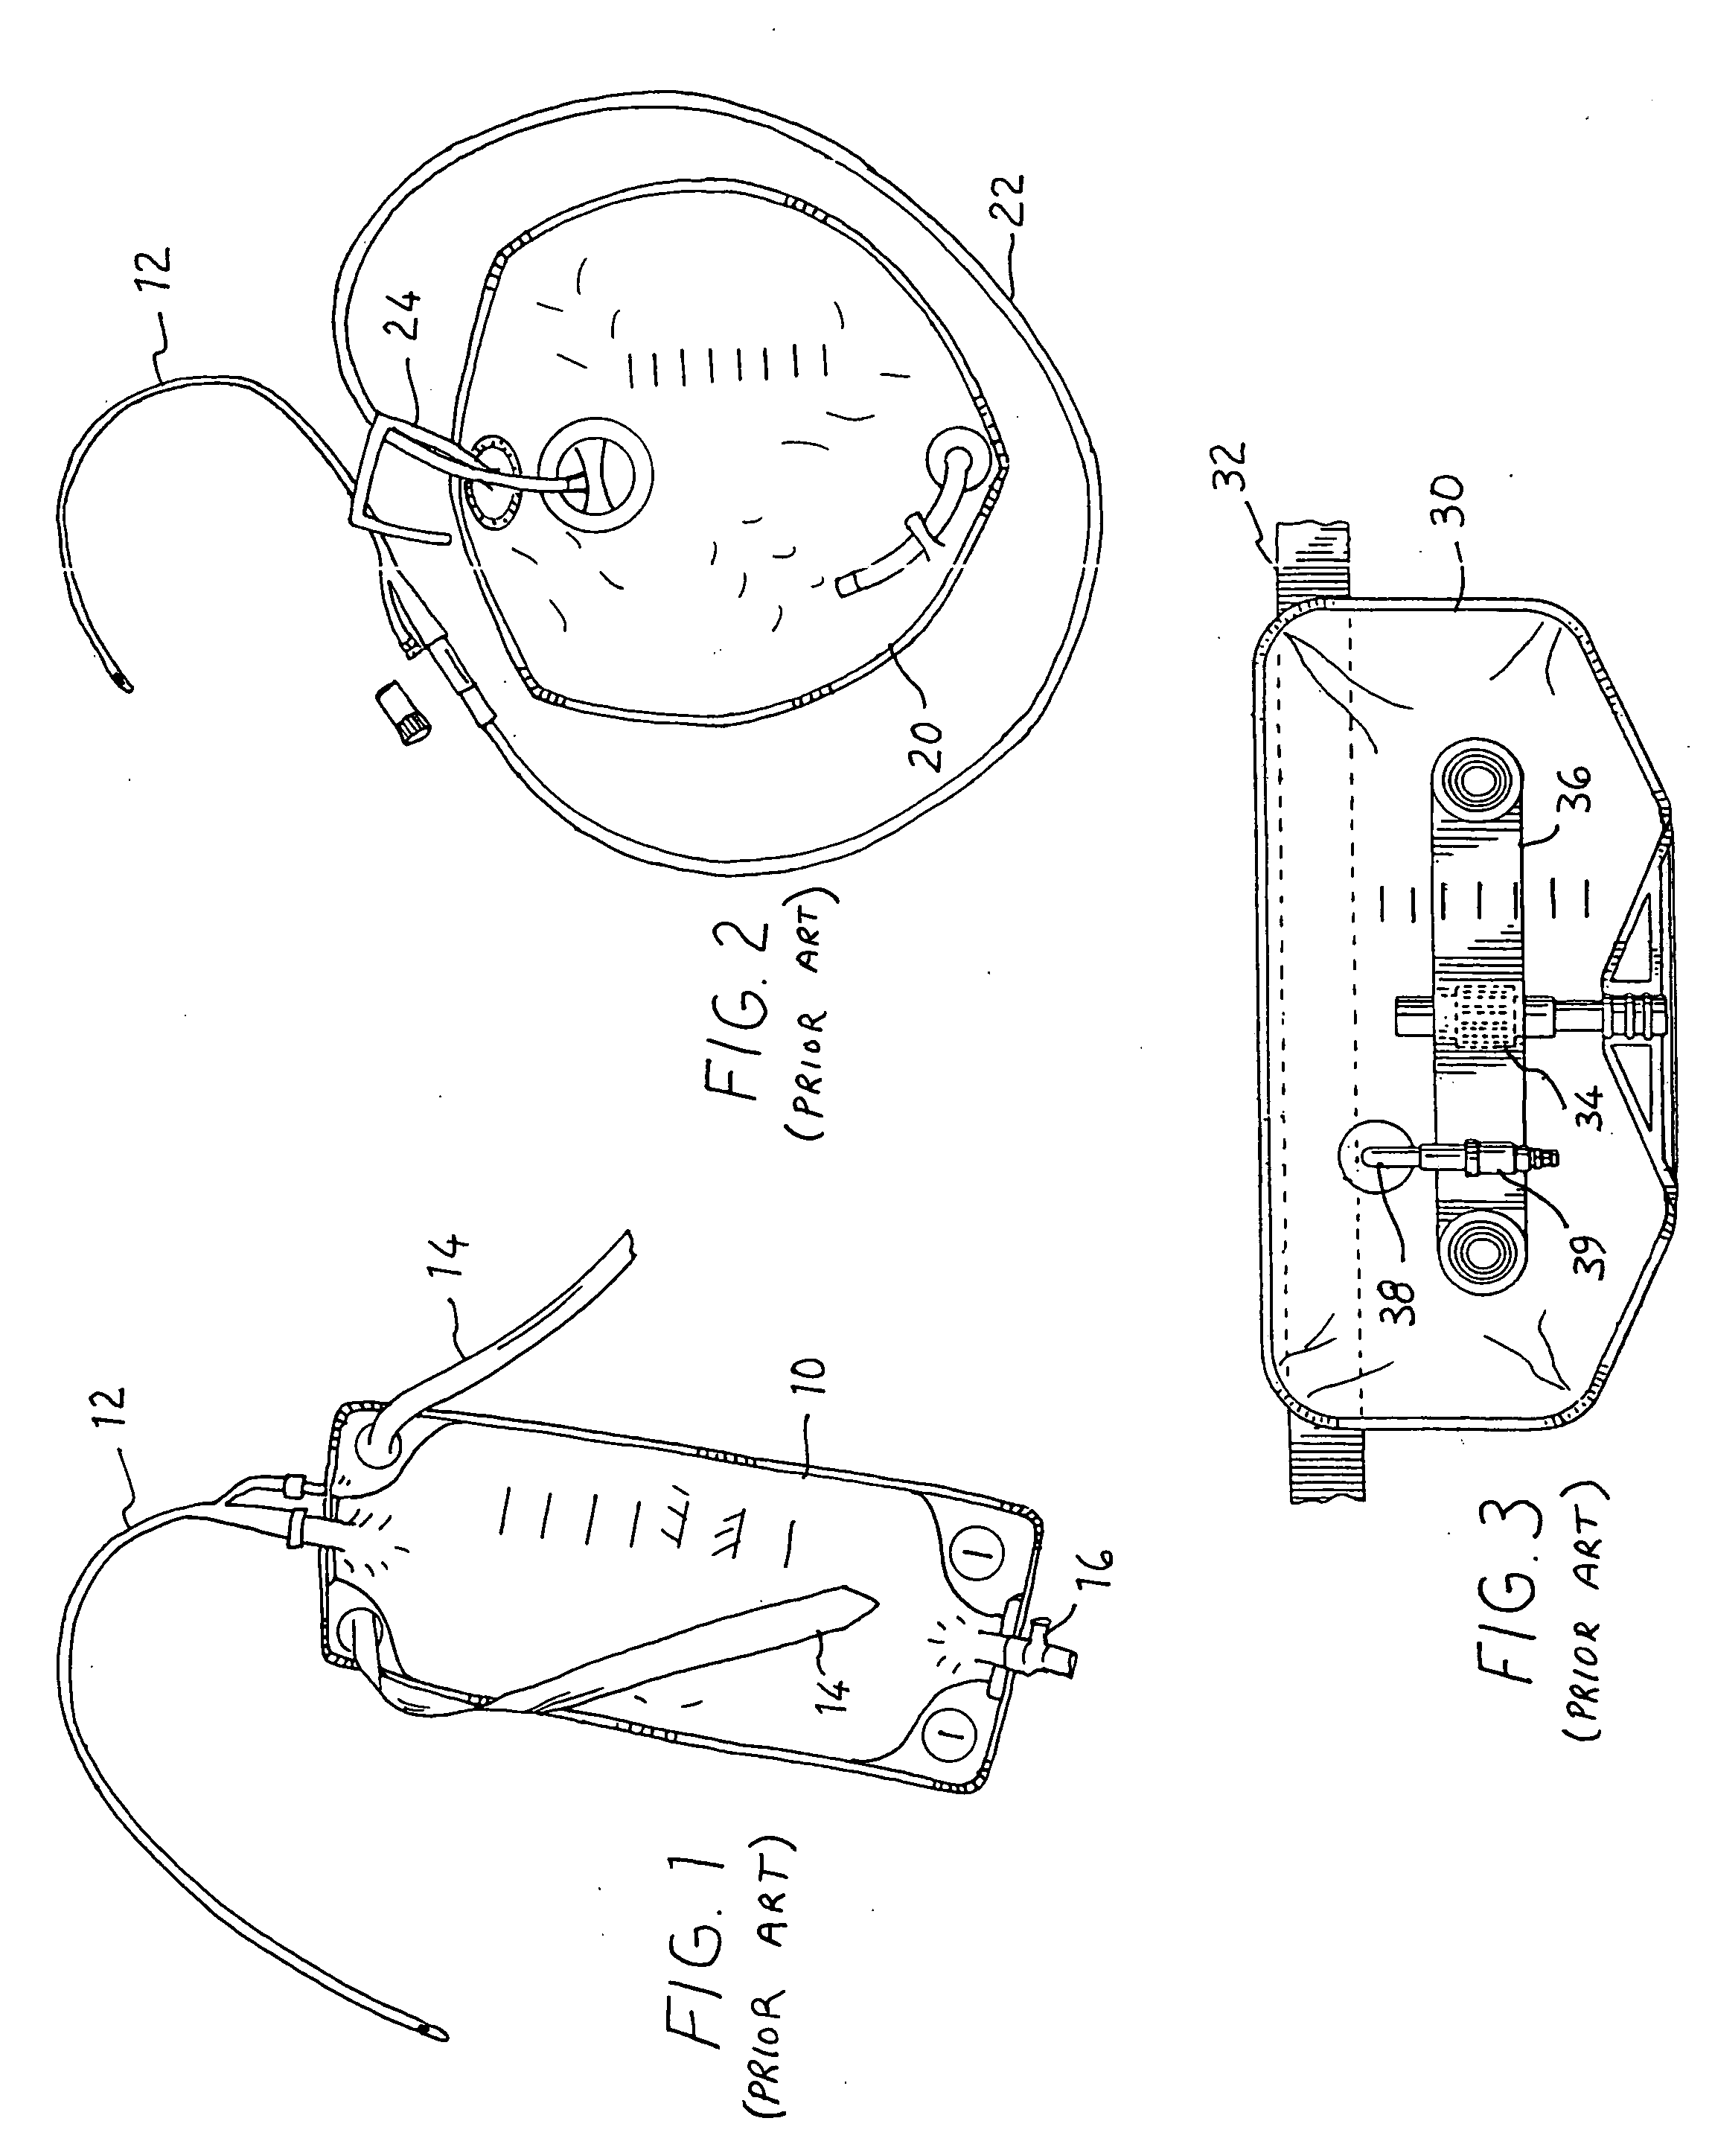 Urine pump for condom catheters and method for using